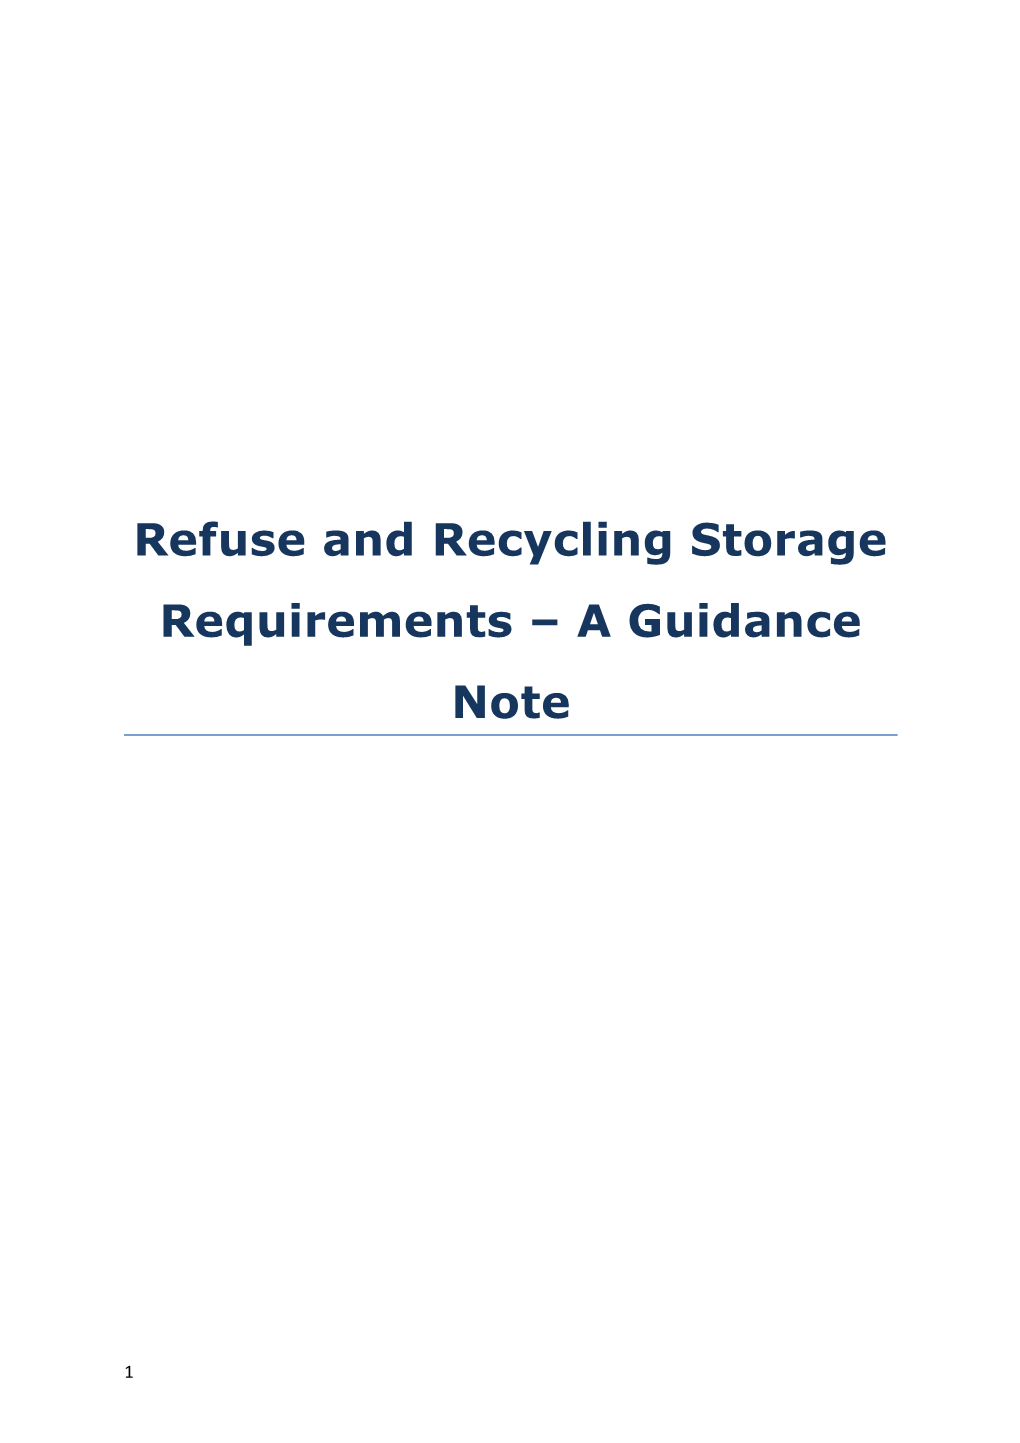 Refuse and Recycling Storage Requirements a Guidance Note